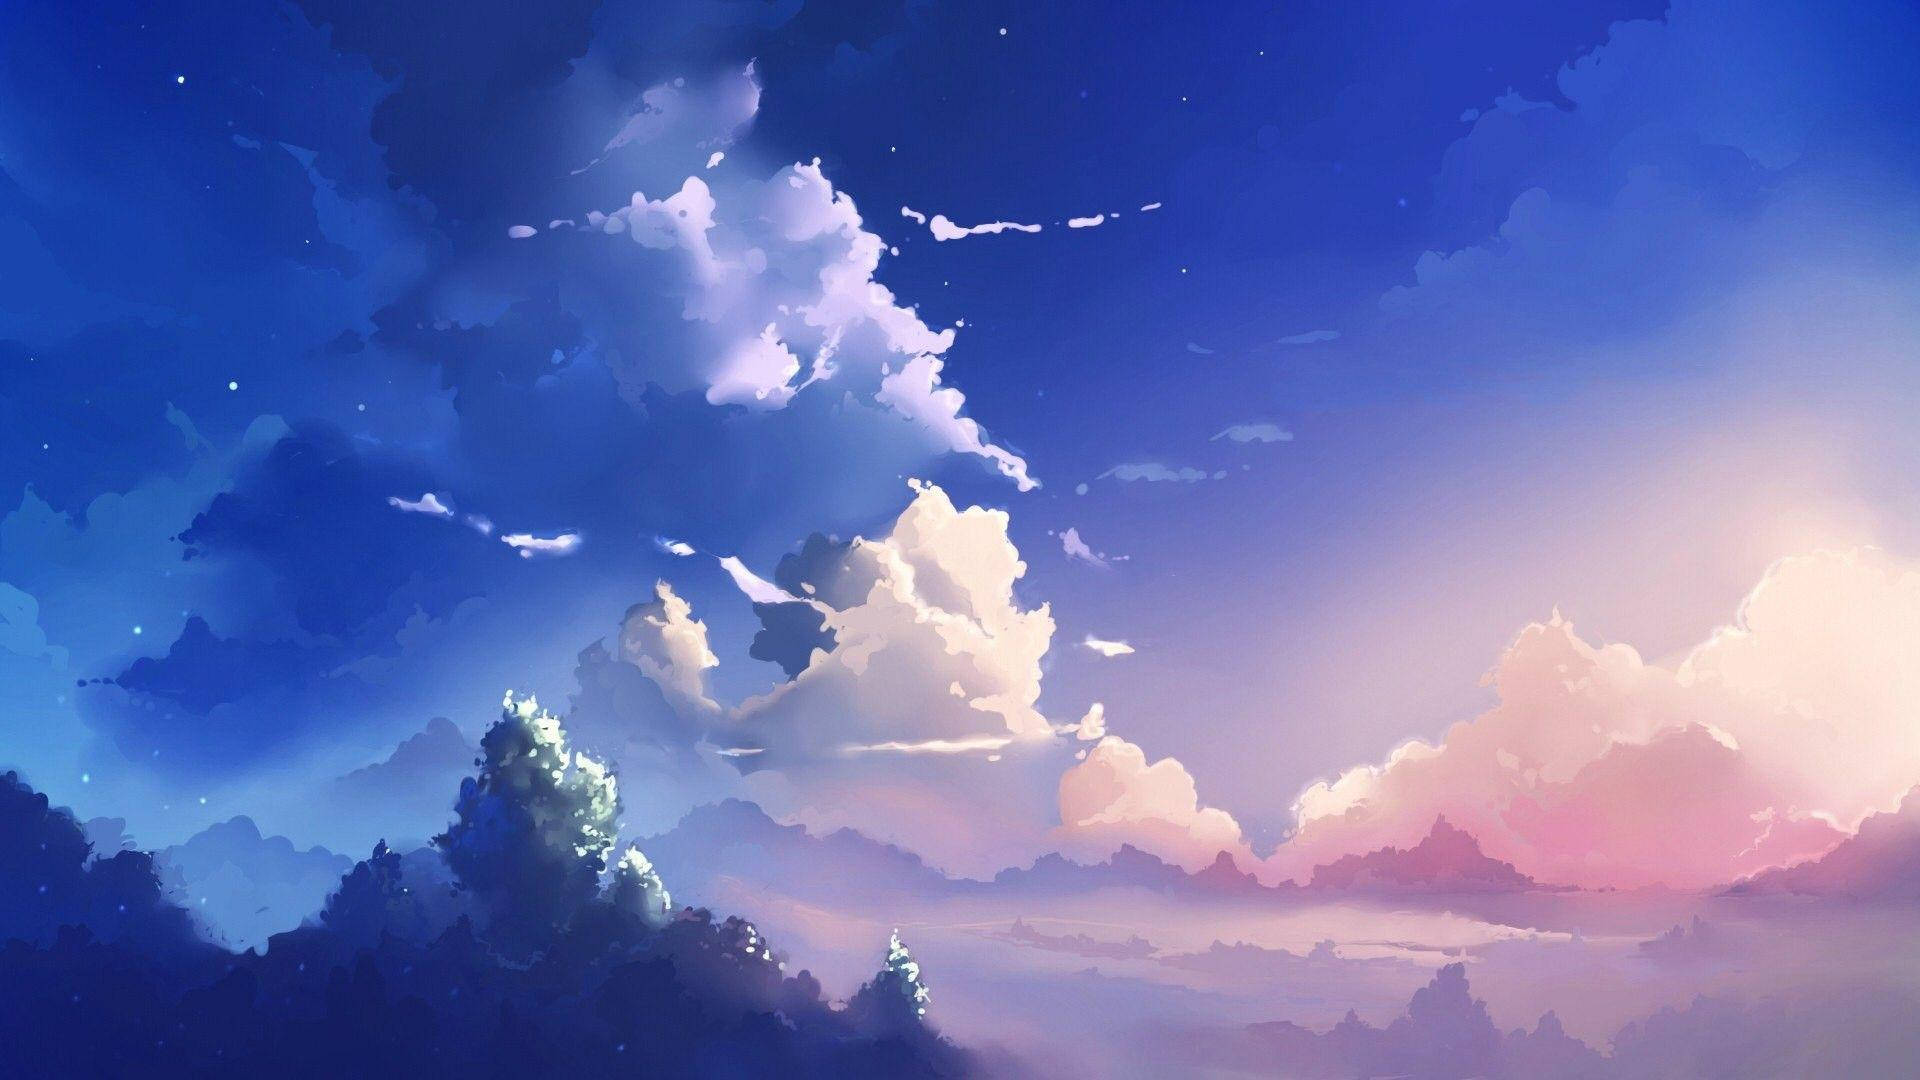 Download Aesthetic Clouds Anime Laptop Wallpaper 